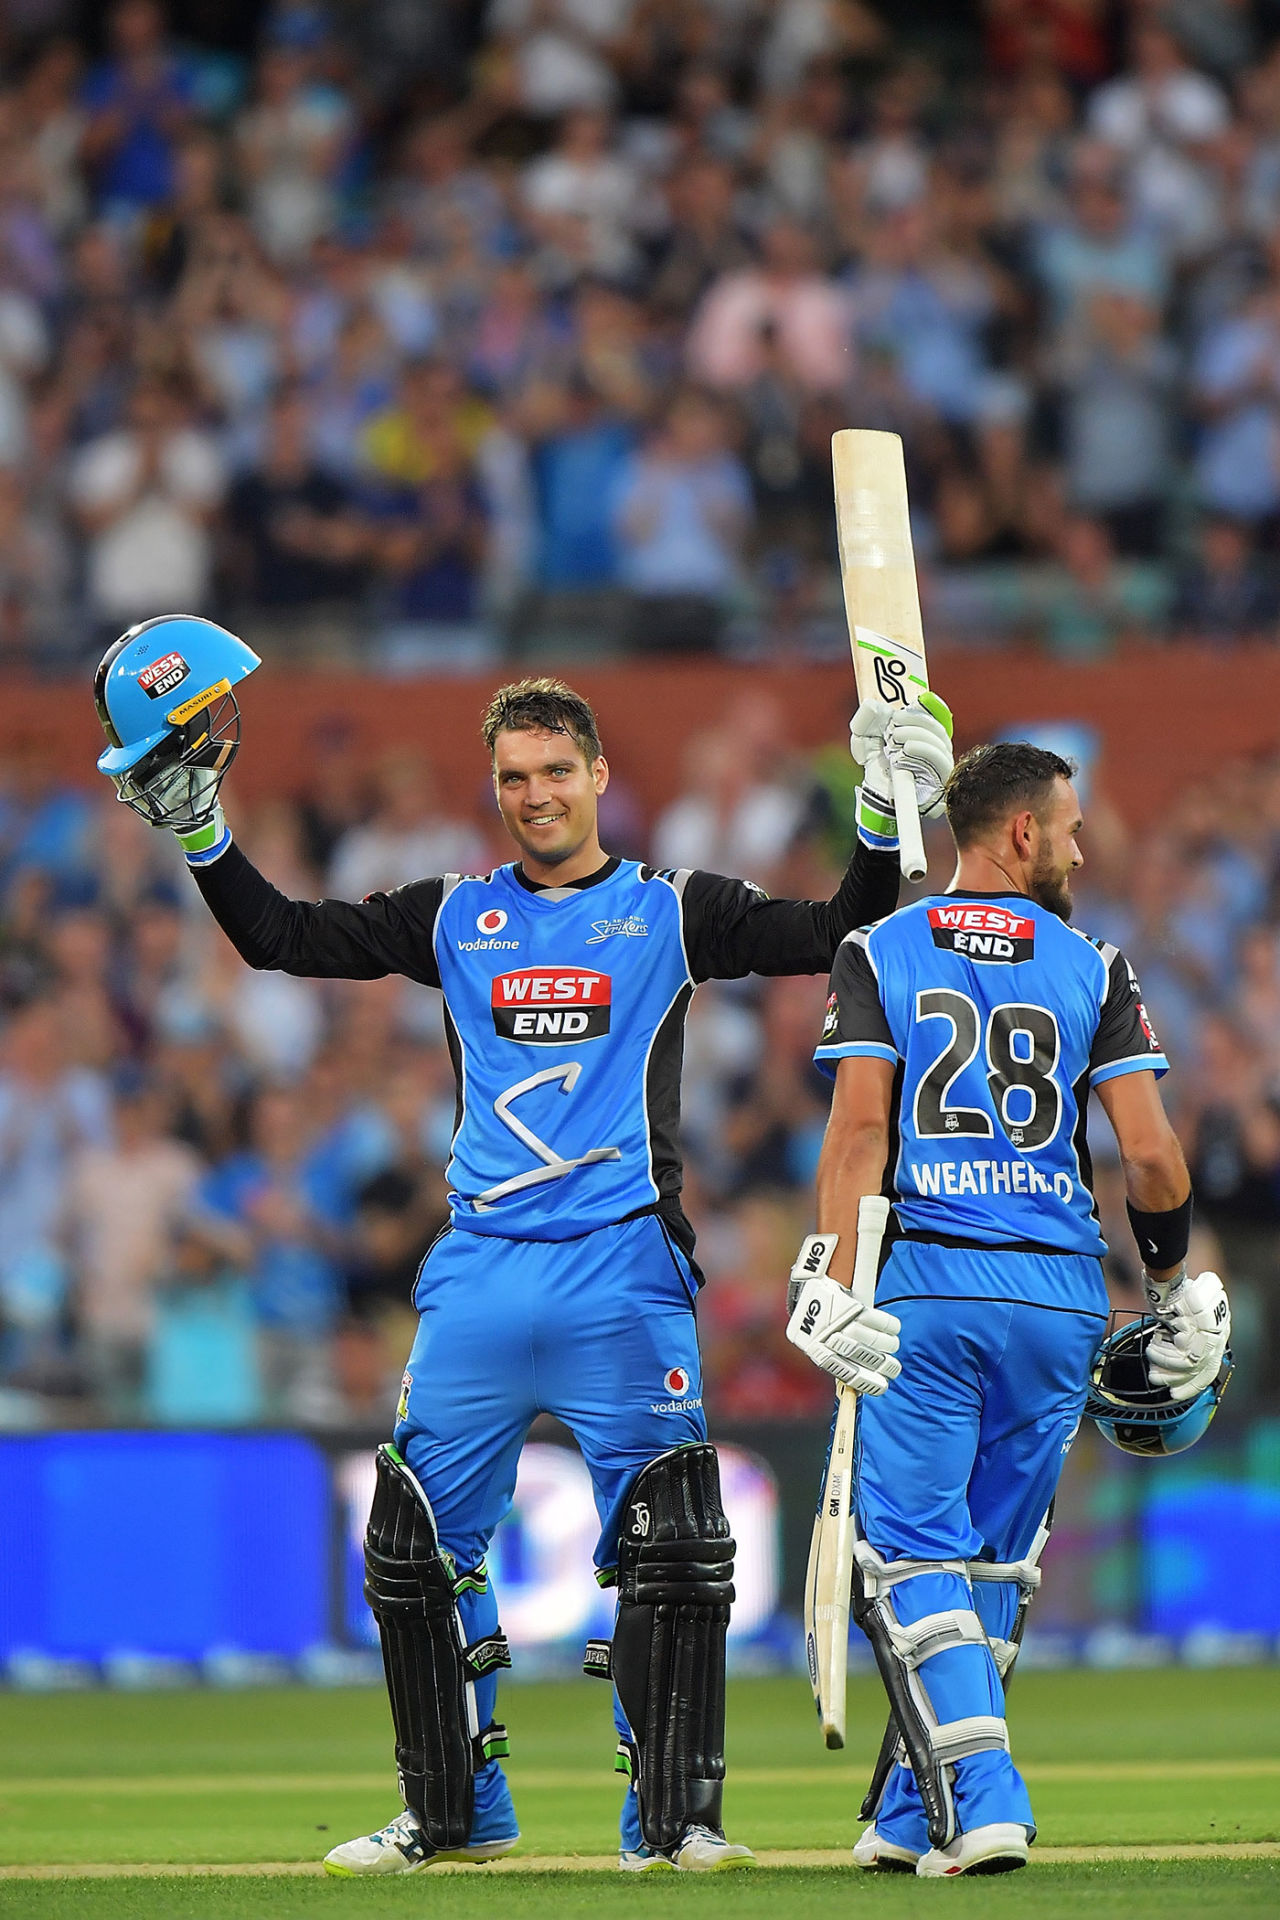 Alex Carey and Jake Weatherald put up a 171-run first-wicket partnership, Adelaide Strikers v Hobart Hurricanes, BBL 2017-18, Adelaide, January 17, 2018